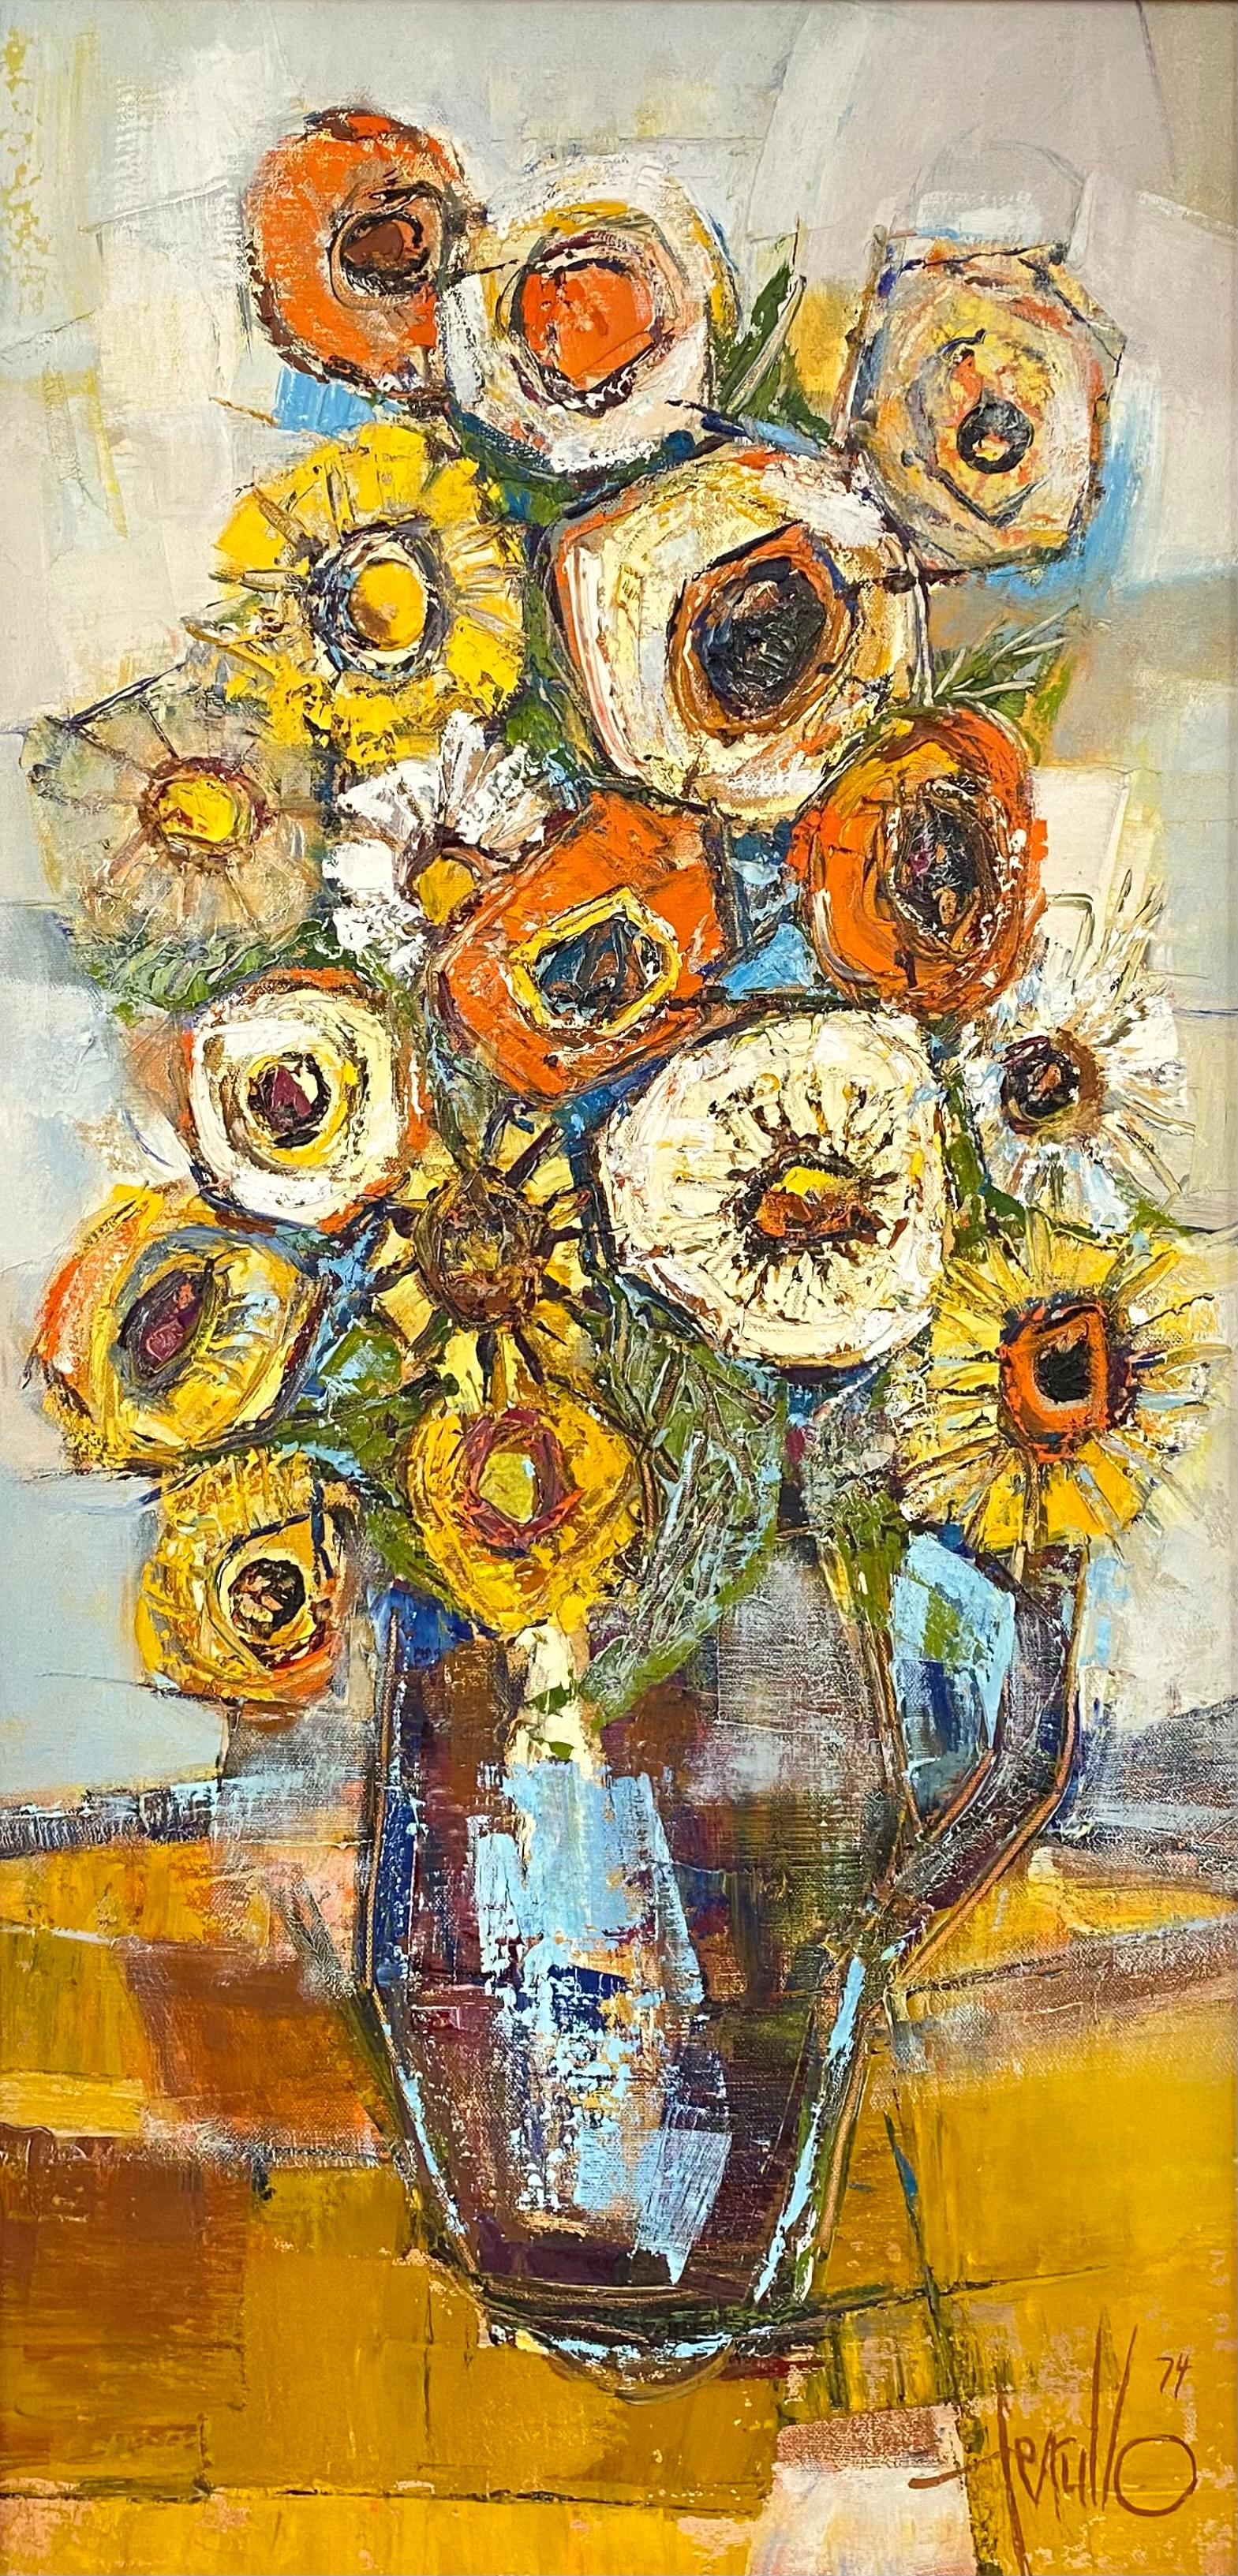 Edith E. Ferullo Still-Life Painting - “Poppies and Sunflowers”